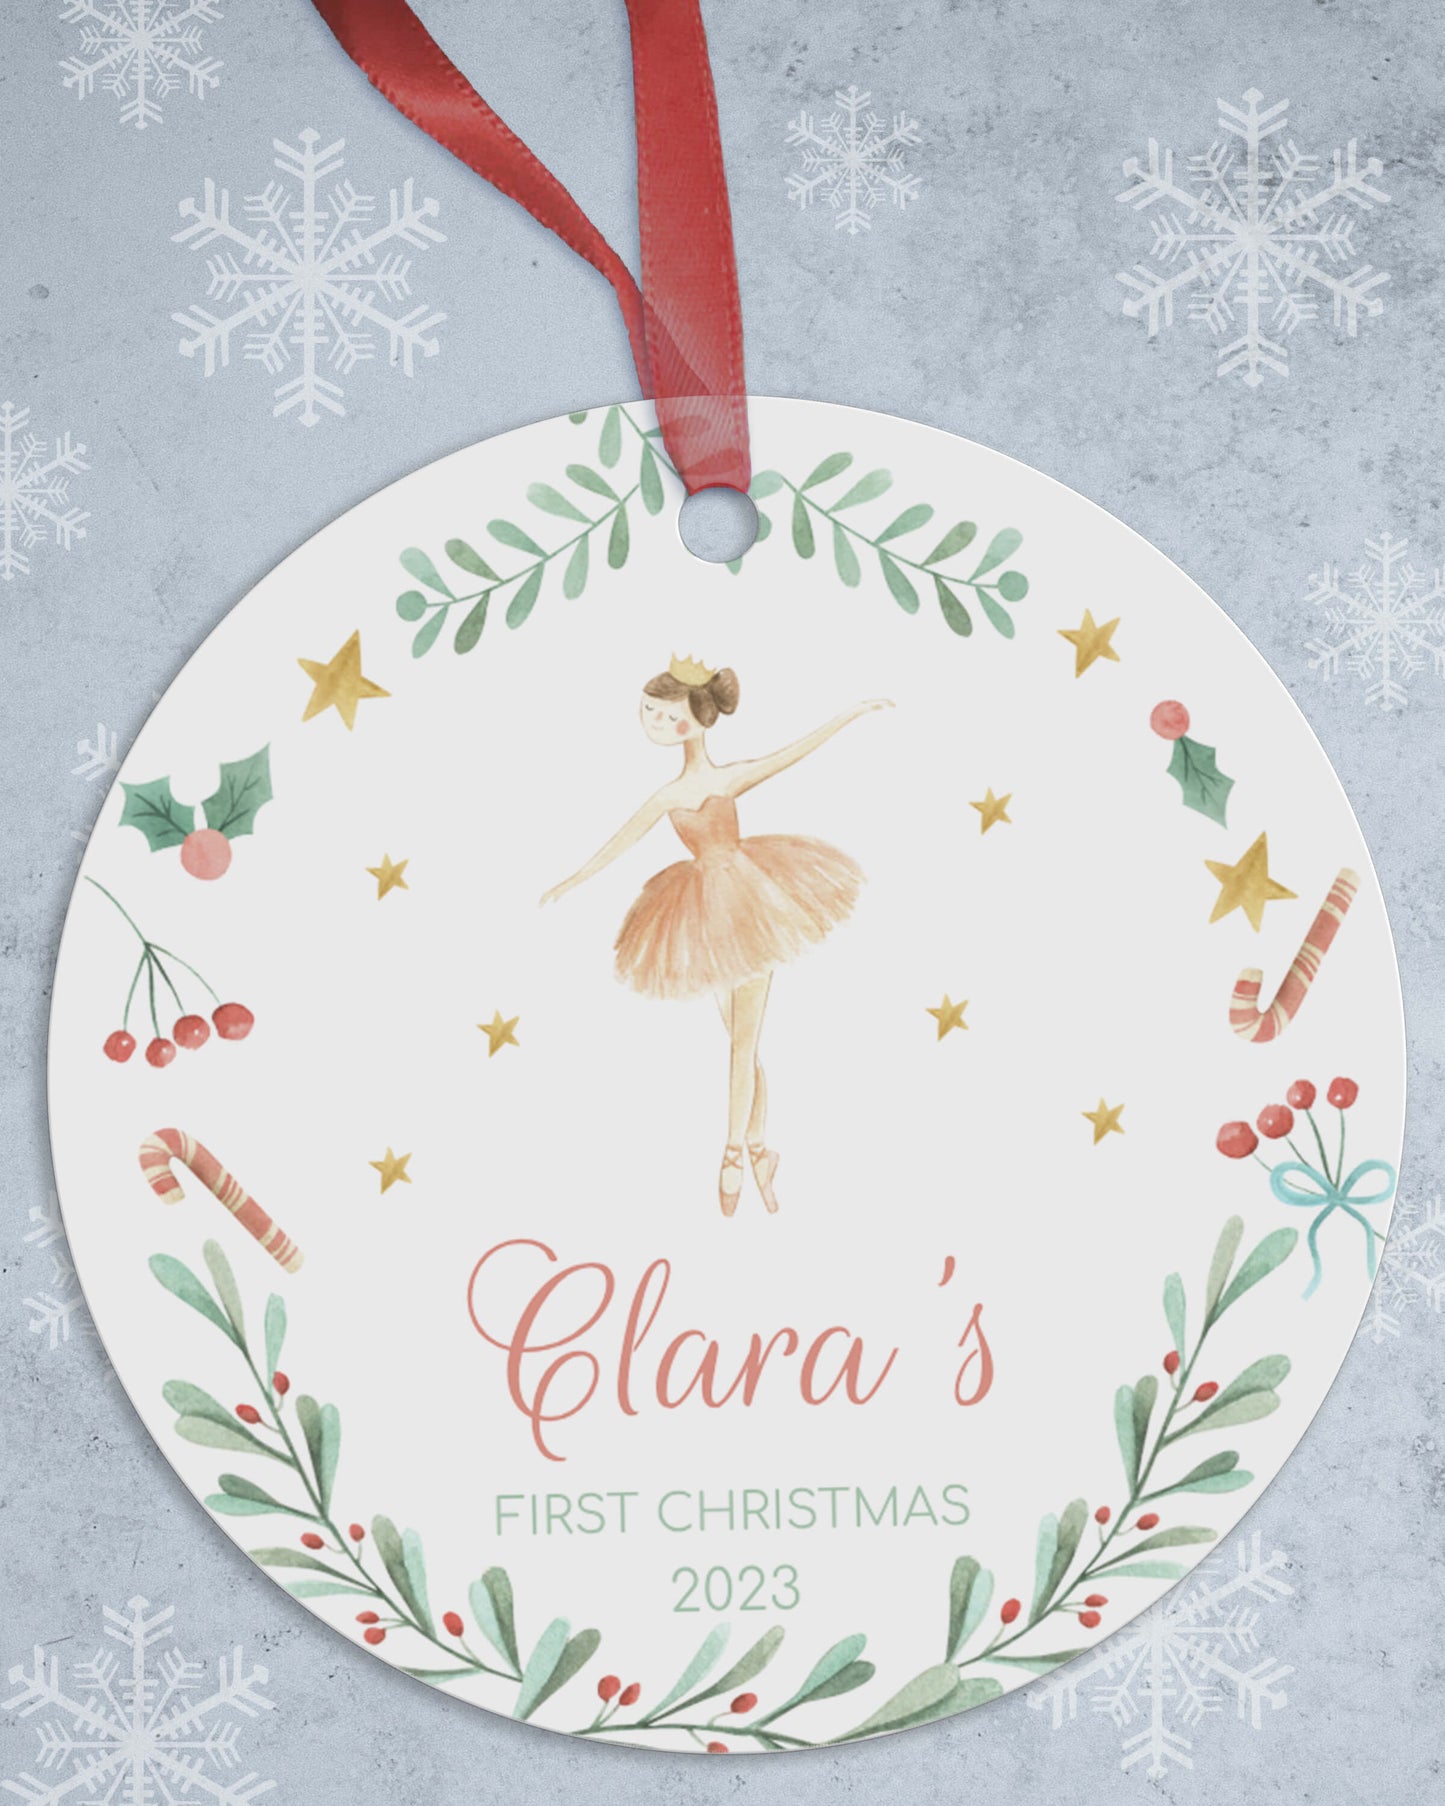 Personalized Ballerina Christmas Ornaments